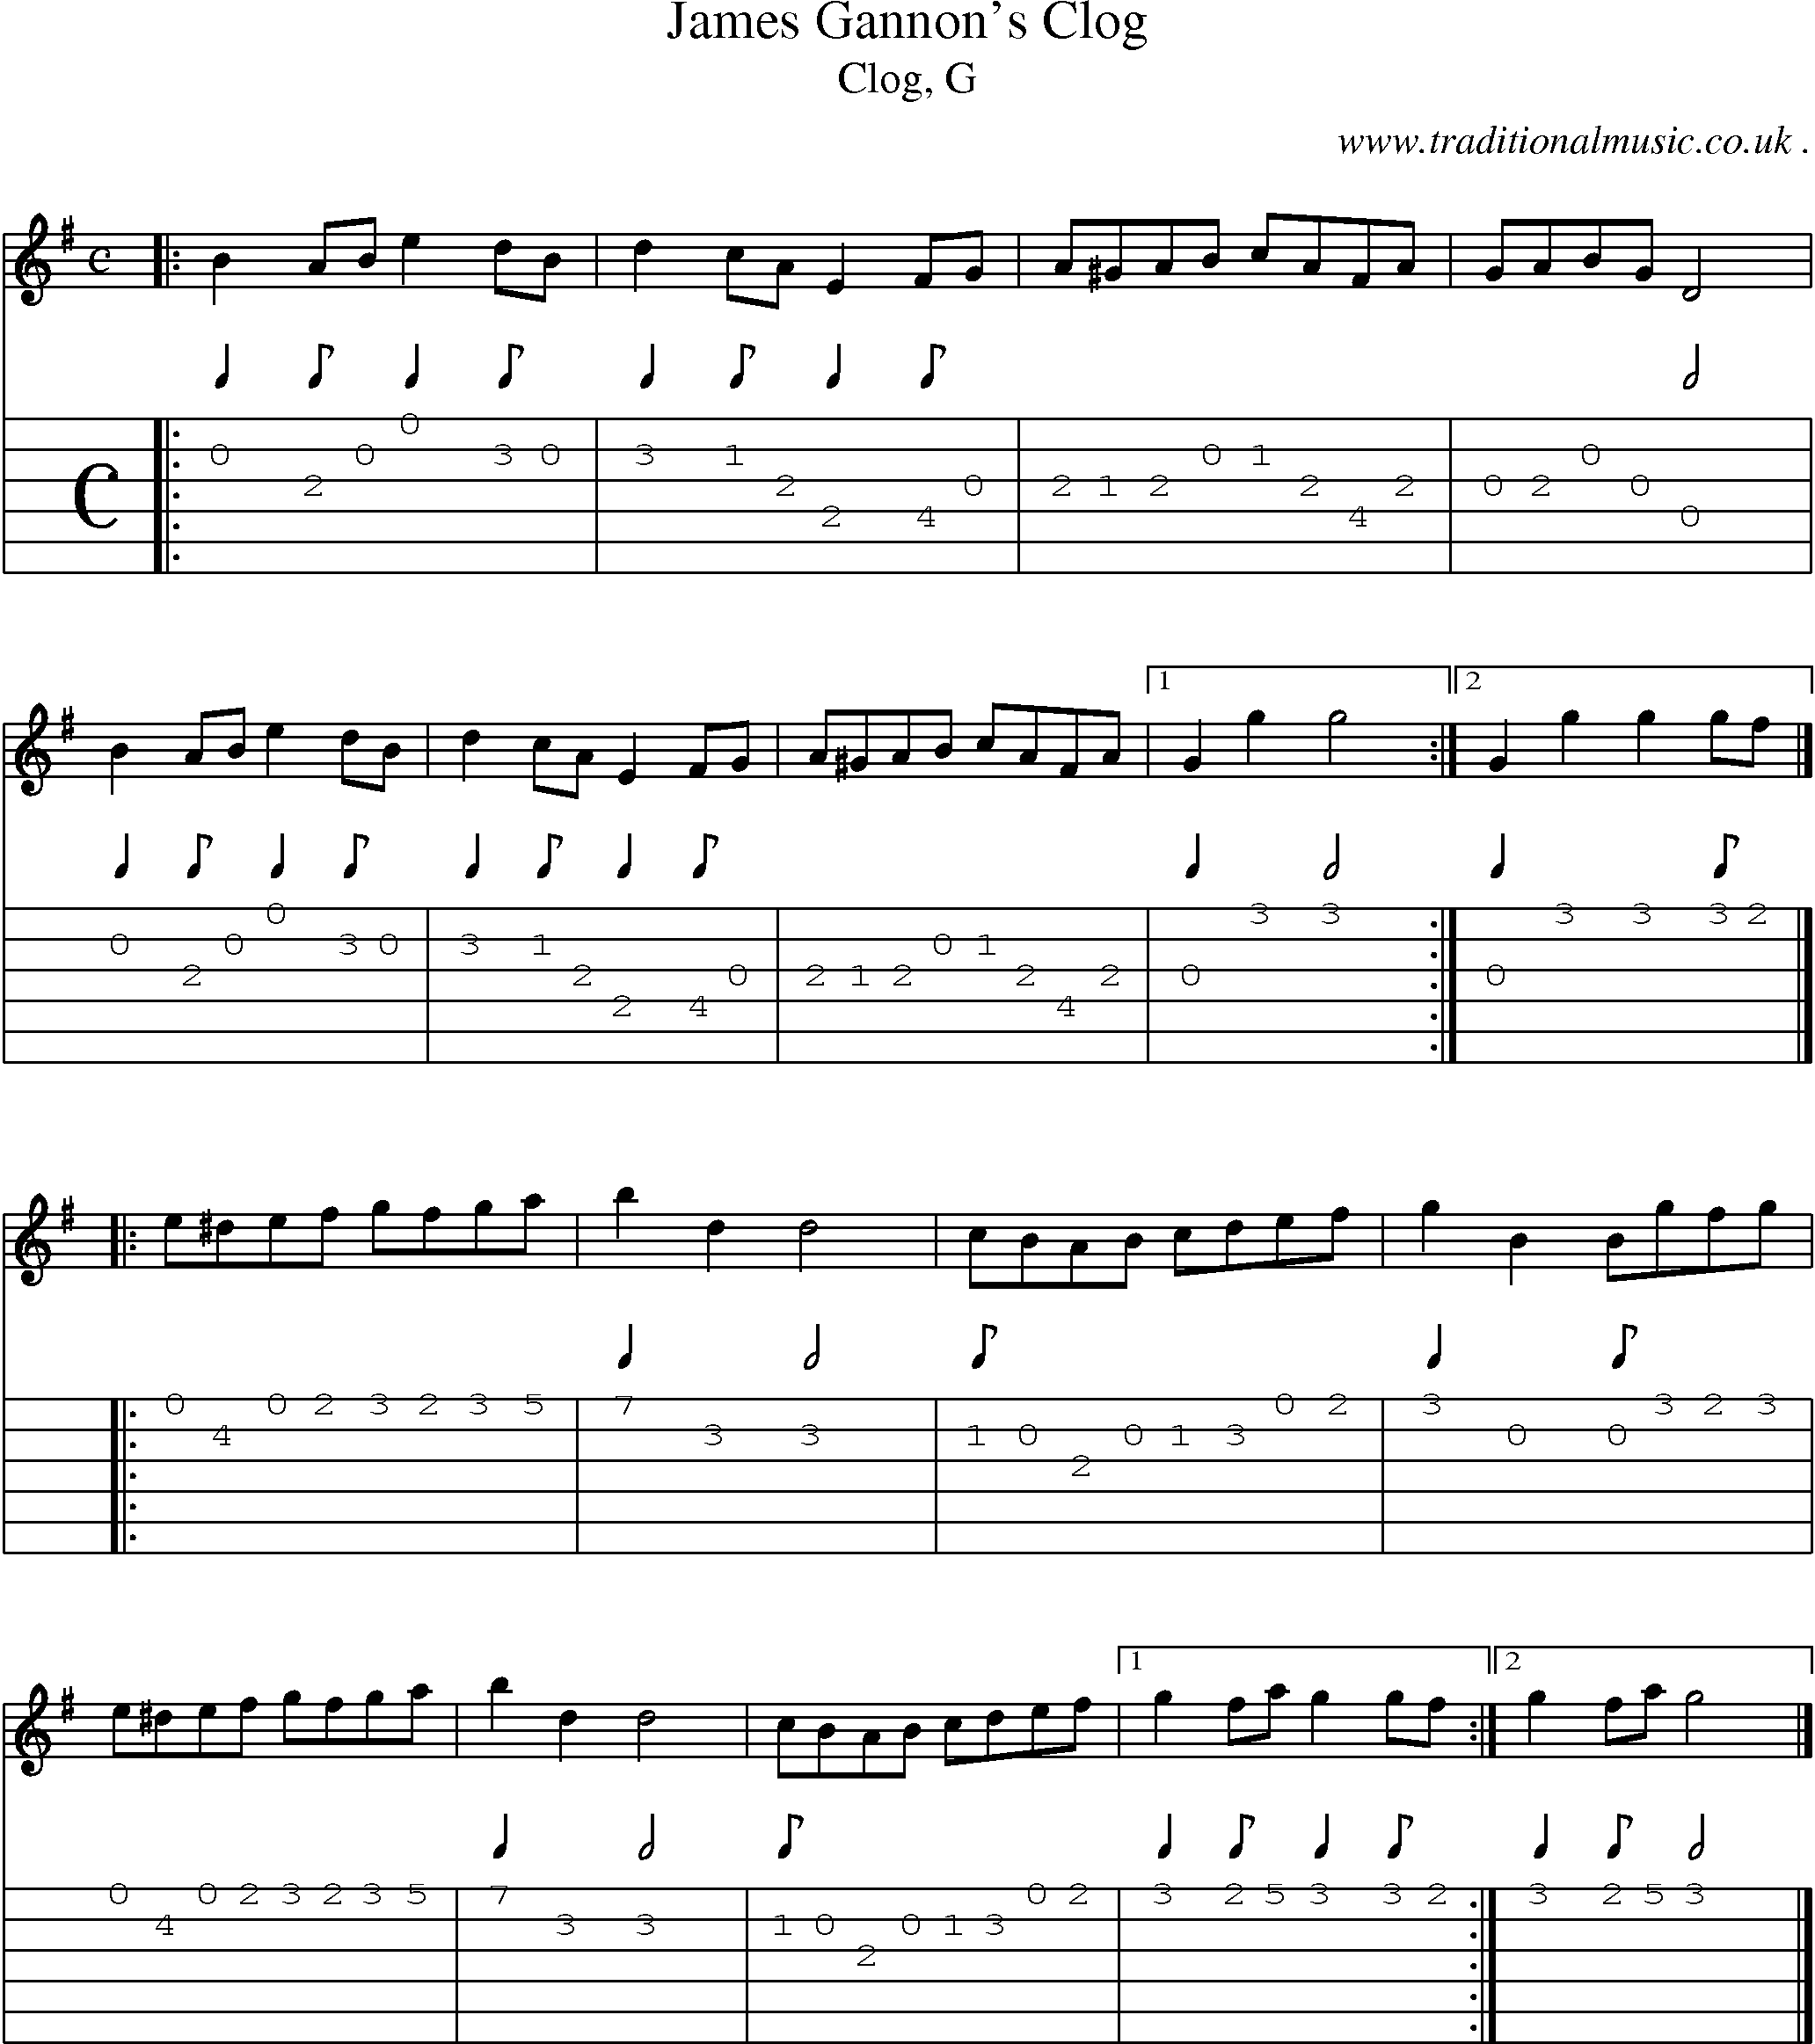 Sheet-music  score, Chords and Guitar Tabs for James Gannons Clog